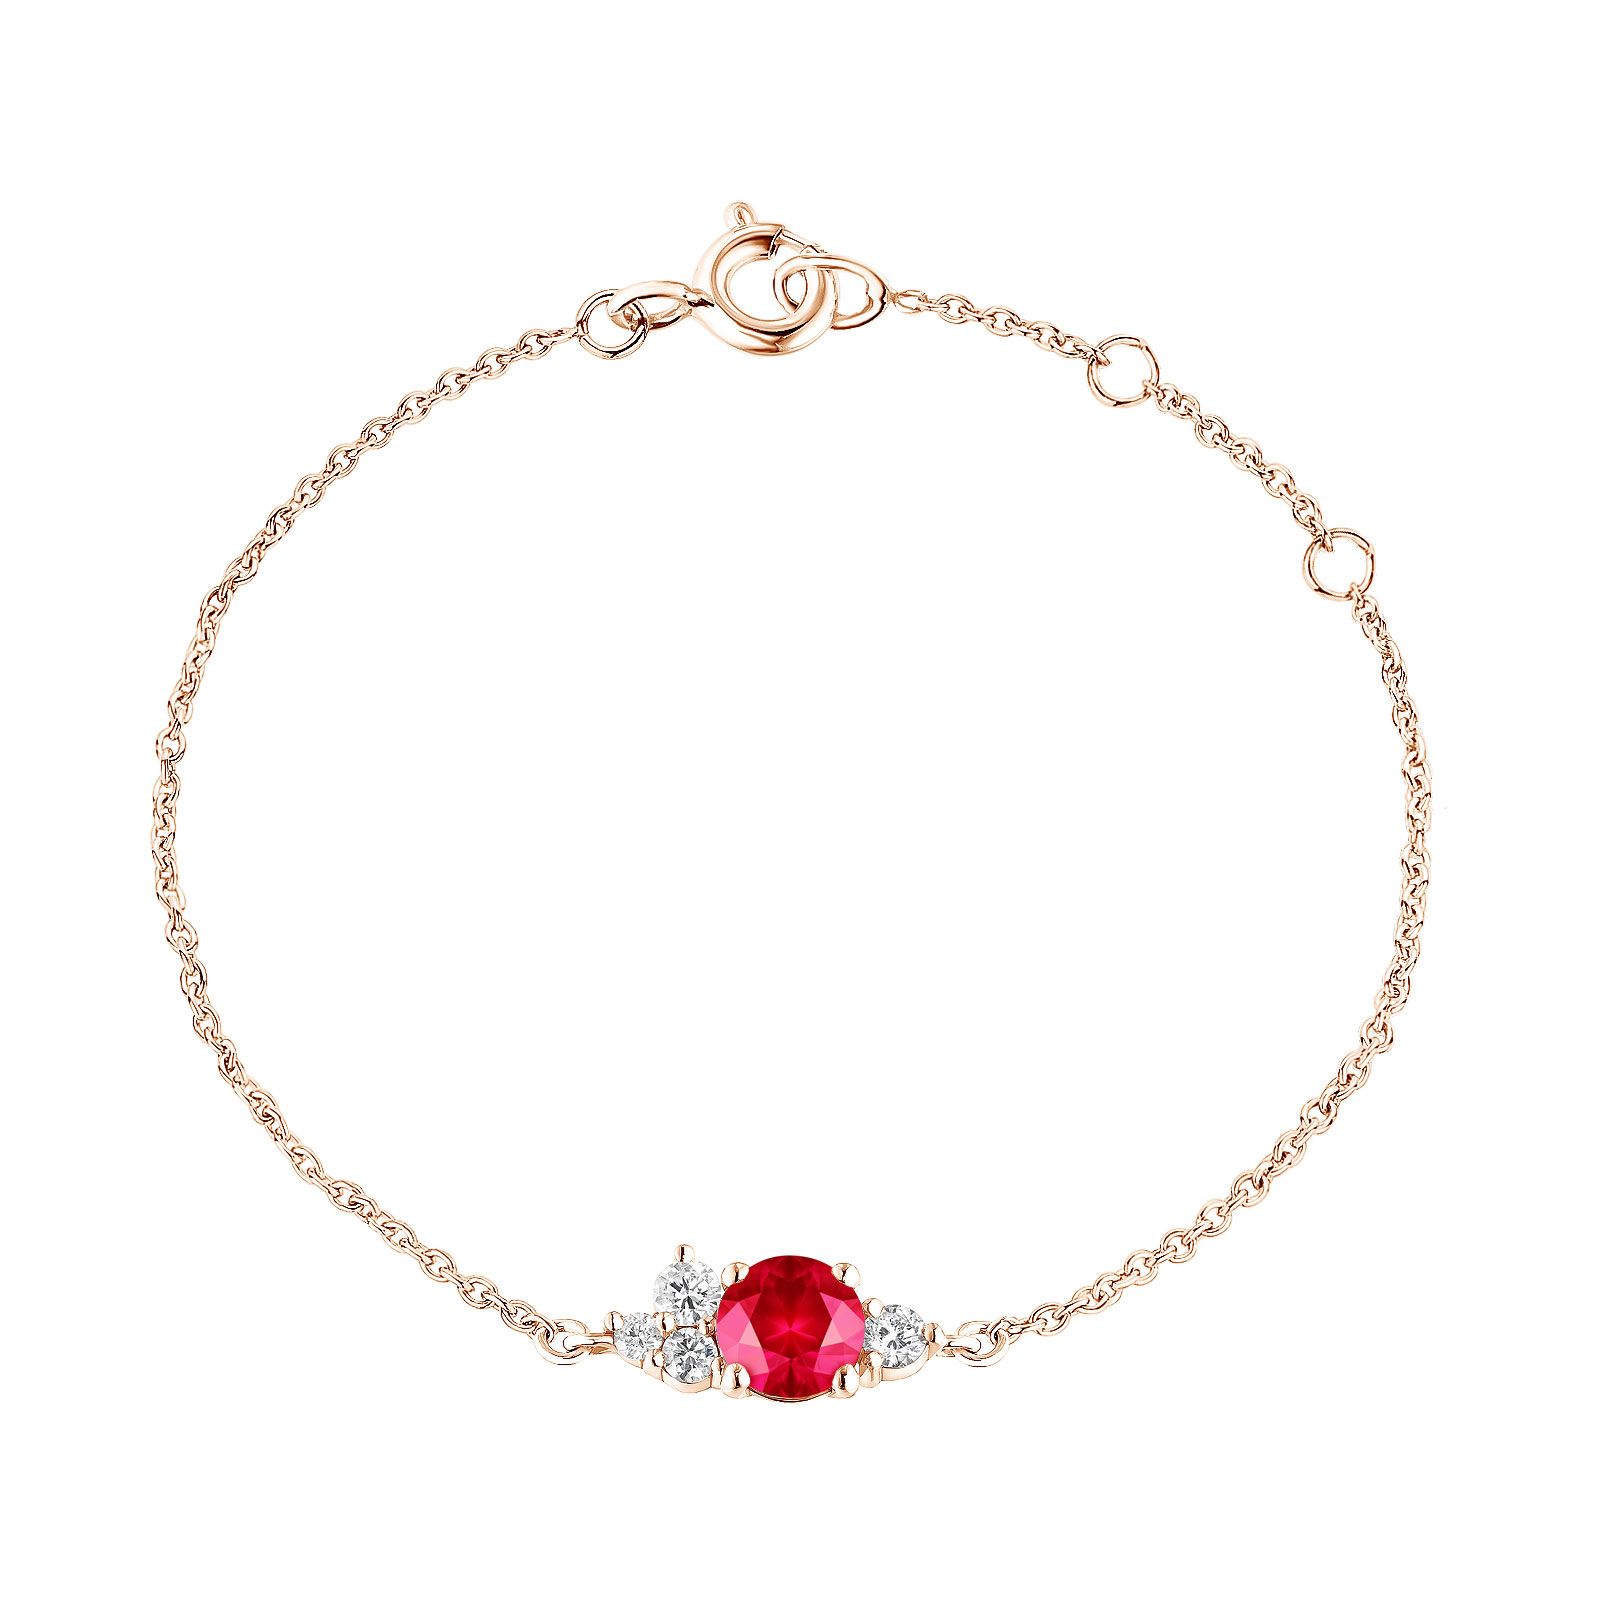 Bracelet Rose gold Ruby and diamonds Baby EverBloom 1